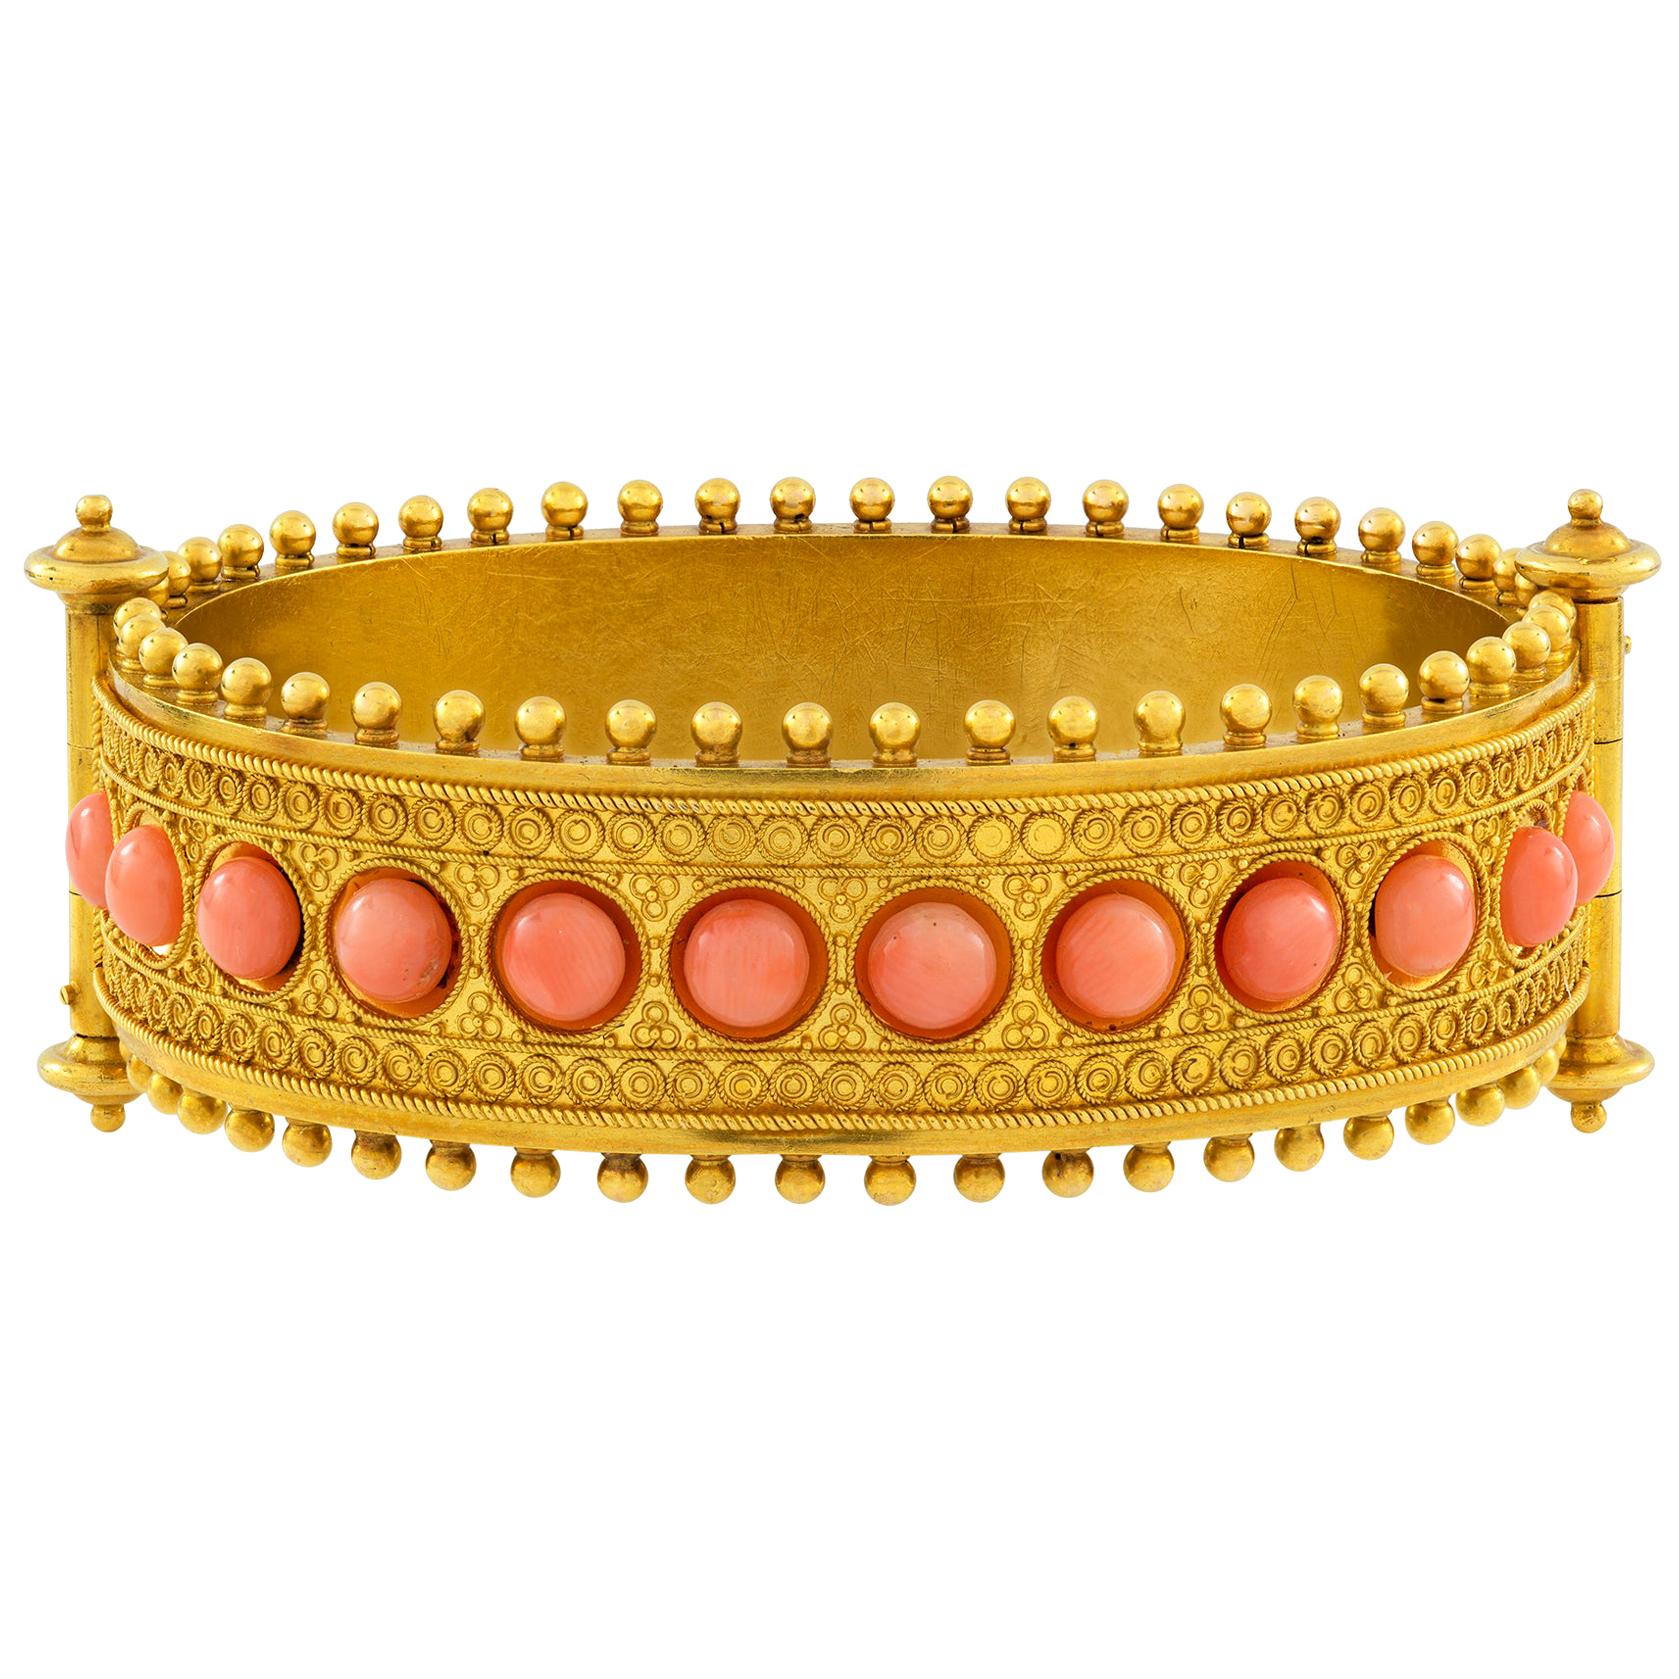 Etruscan Revival Gold and Coral Hinged Bangle